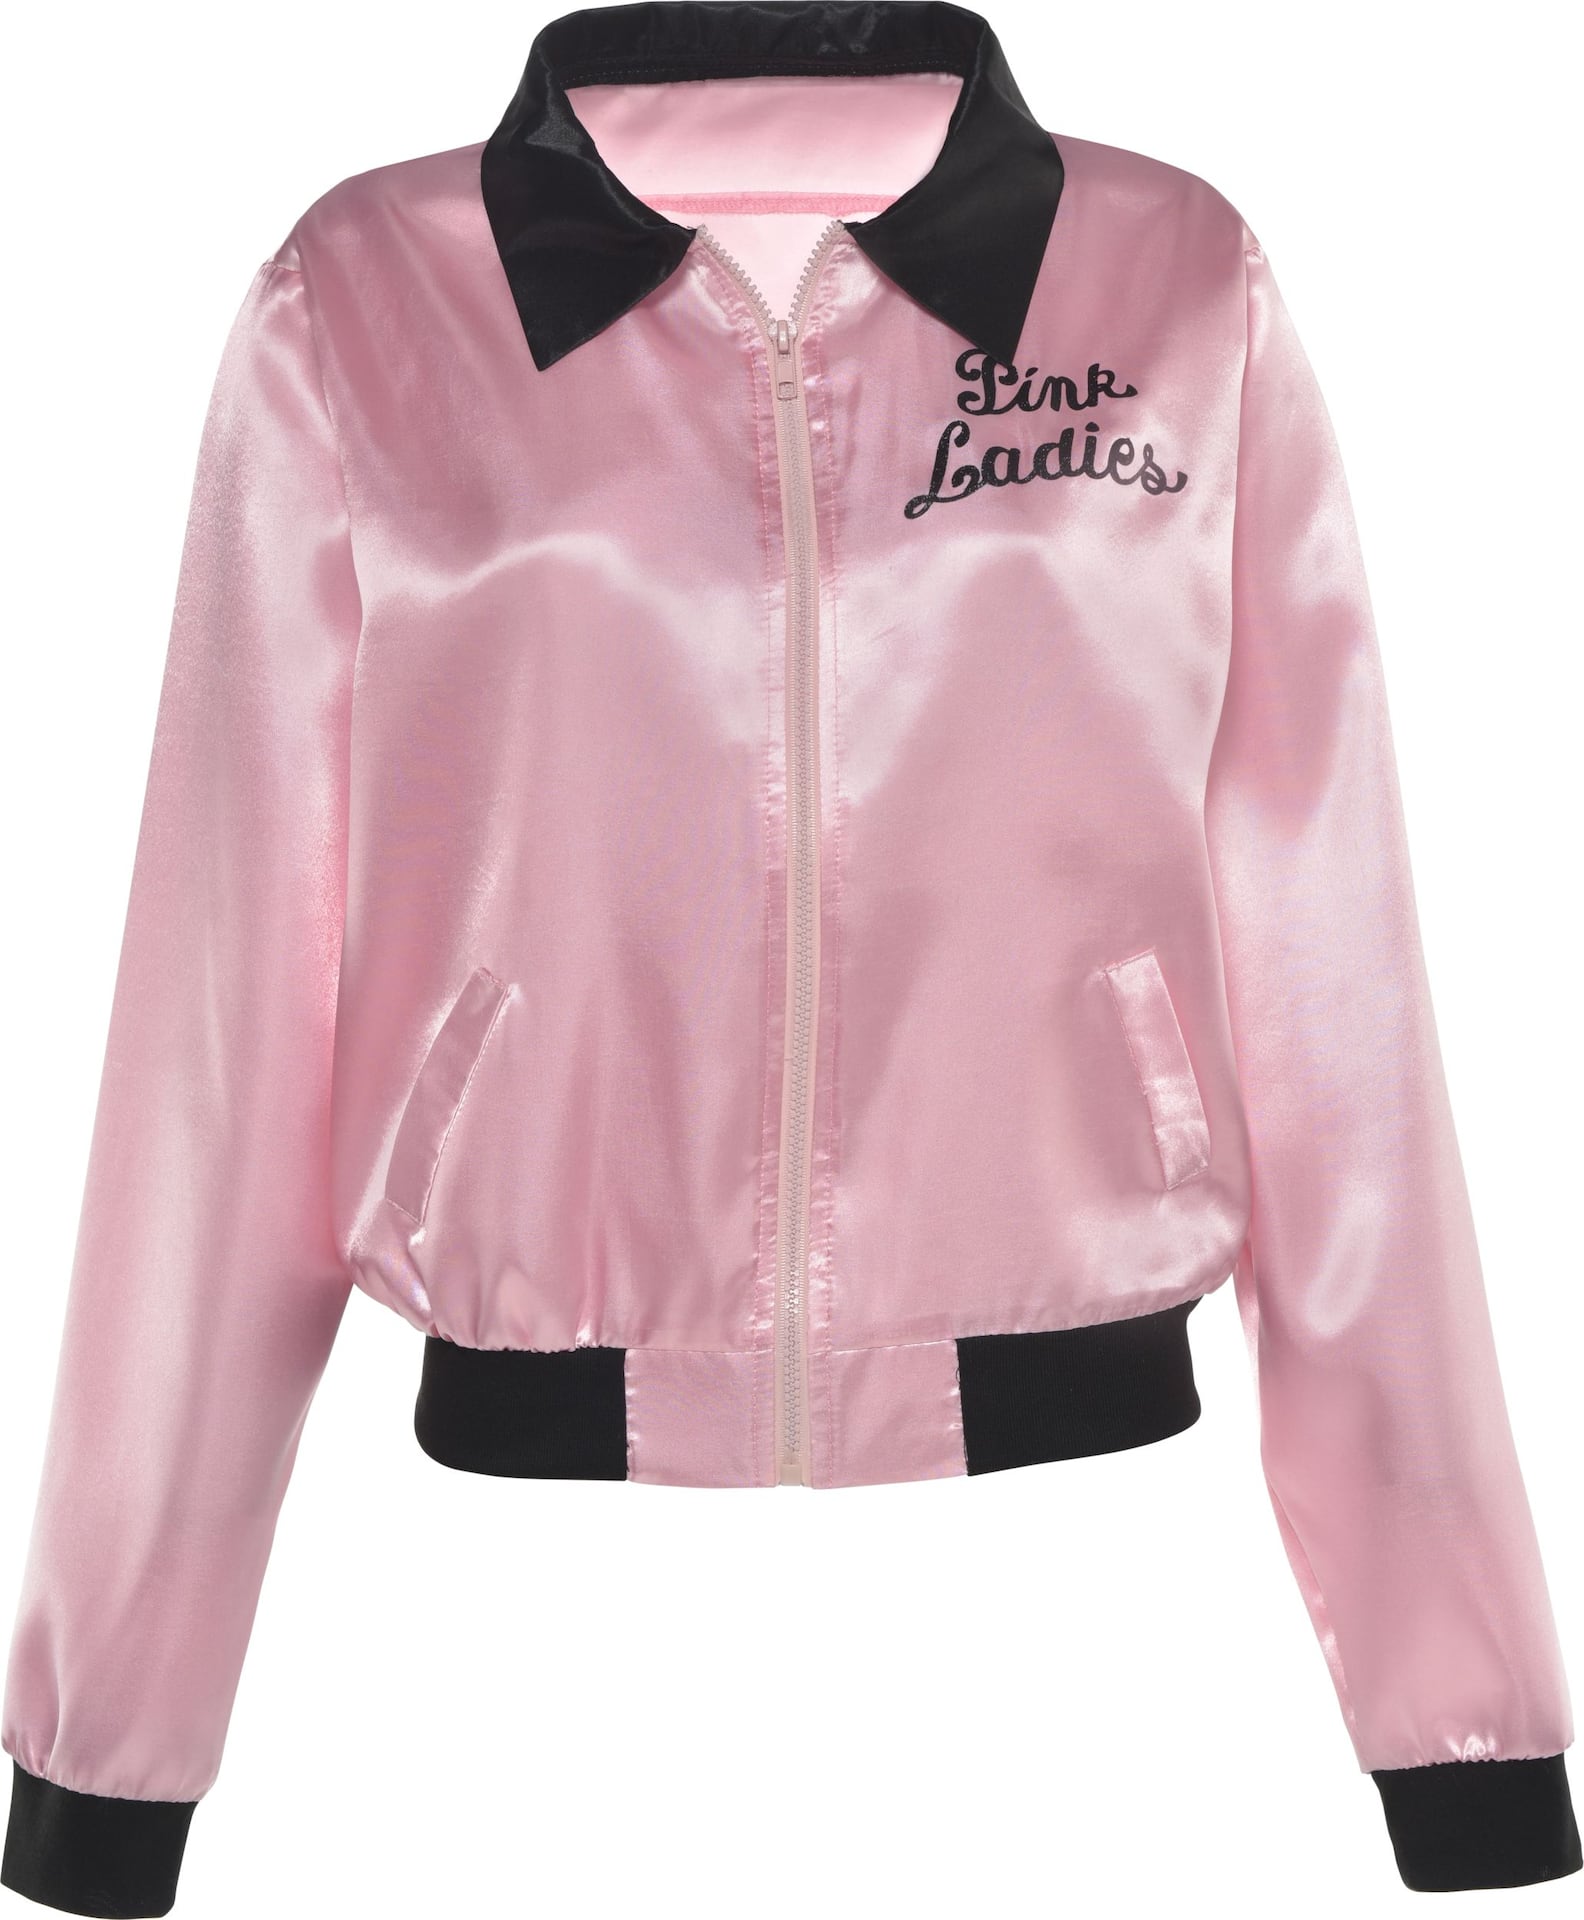 Adult Grease Pink Ladies Jacket, Pink/Black, One Size, Wearable Costume ...